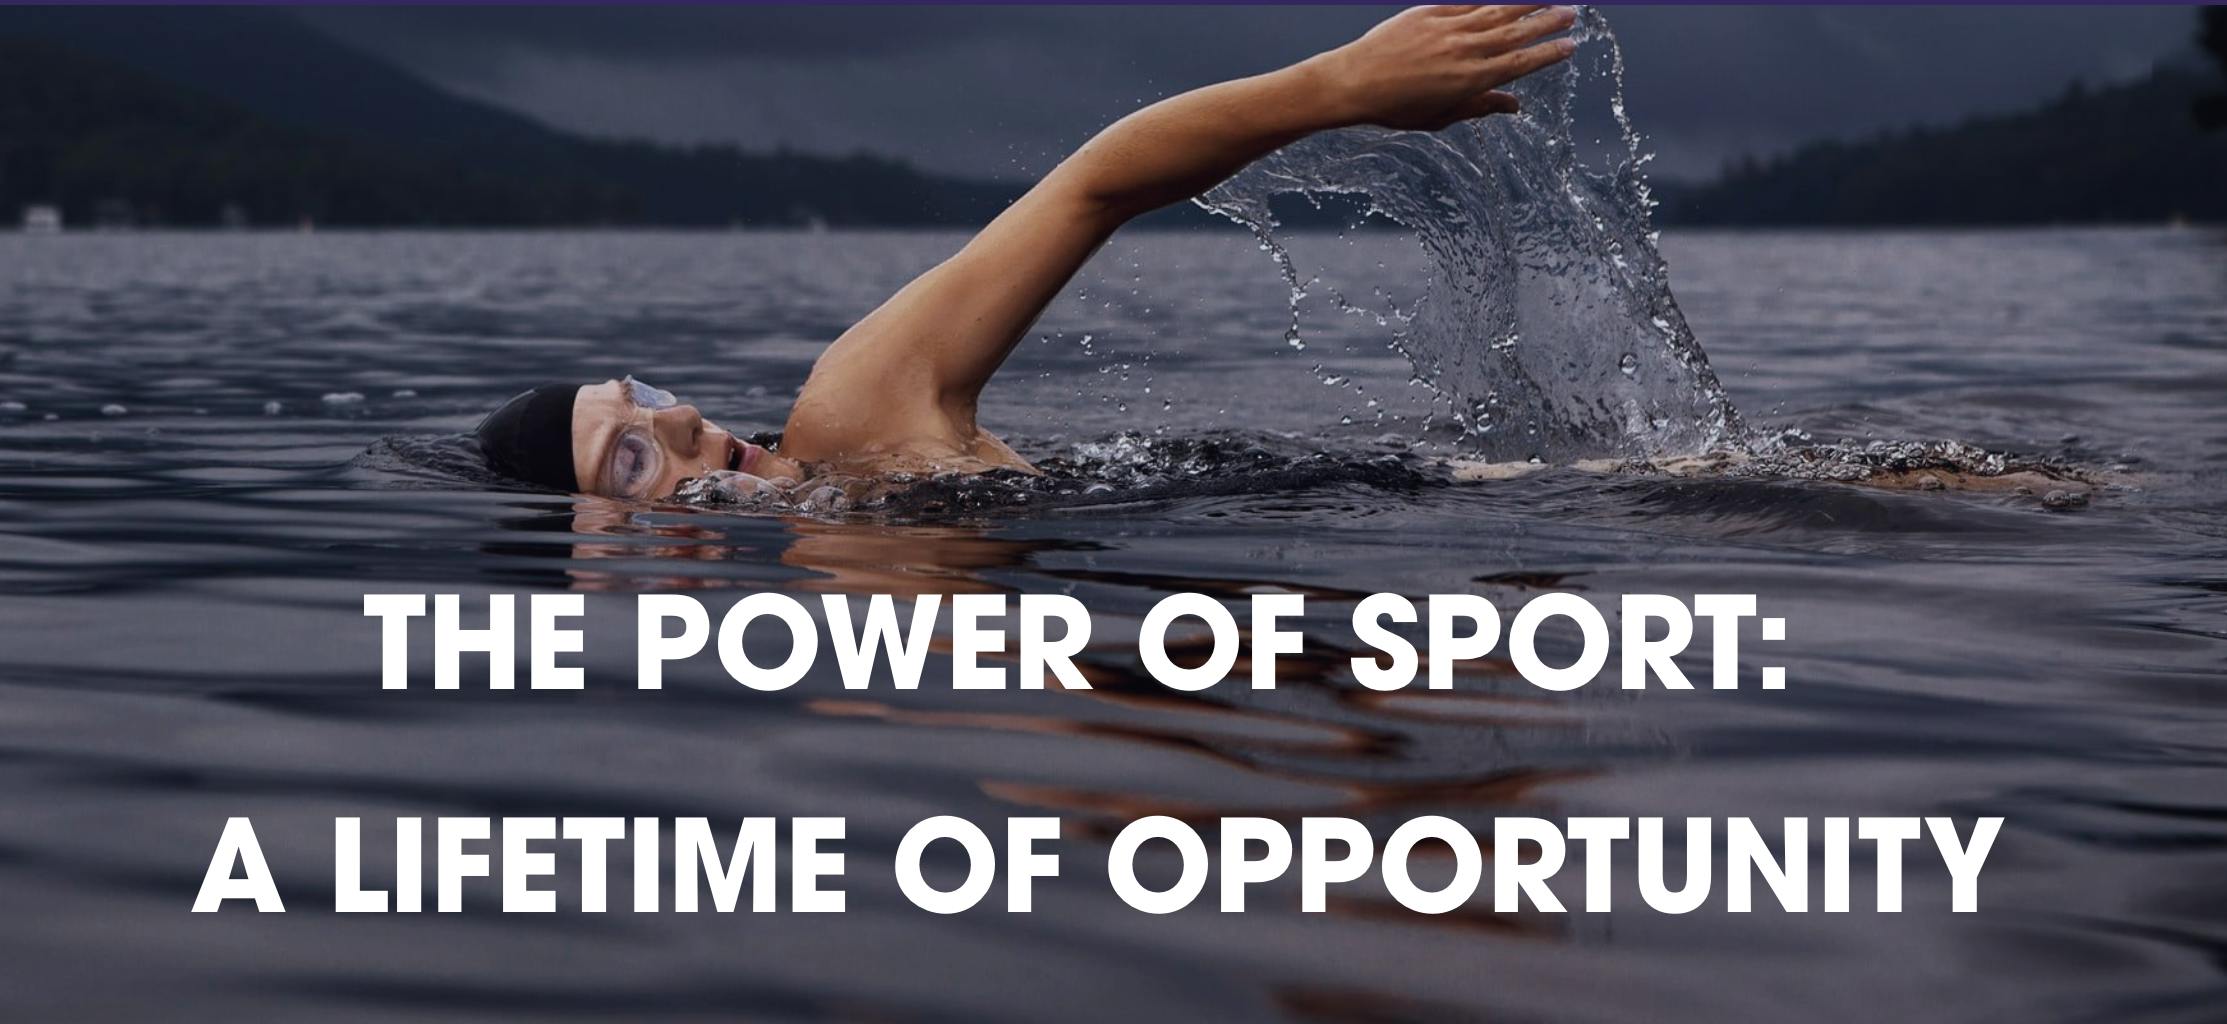 The Power of Sport: A lifetime of opportunity. White capital letter text on a background image which features a person swimming in a lake wearing a swim cap.